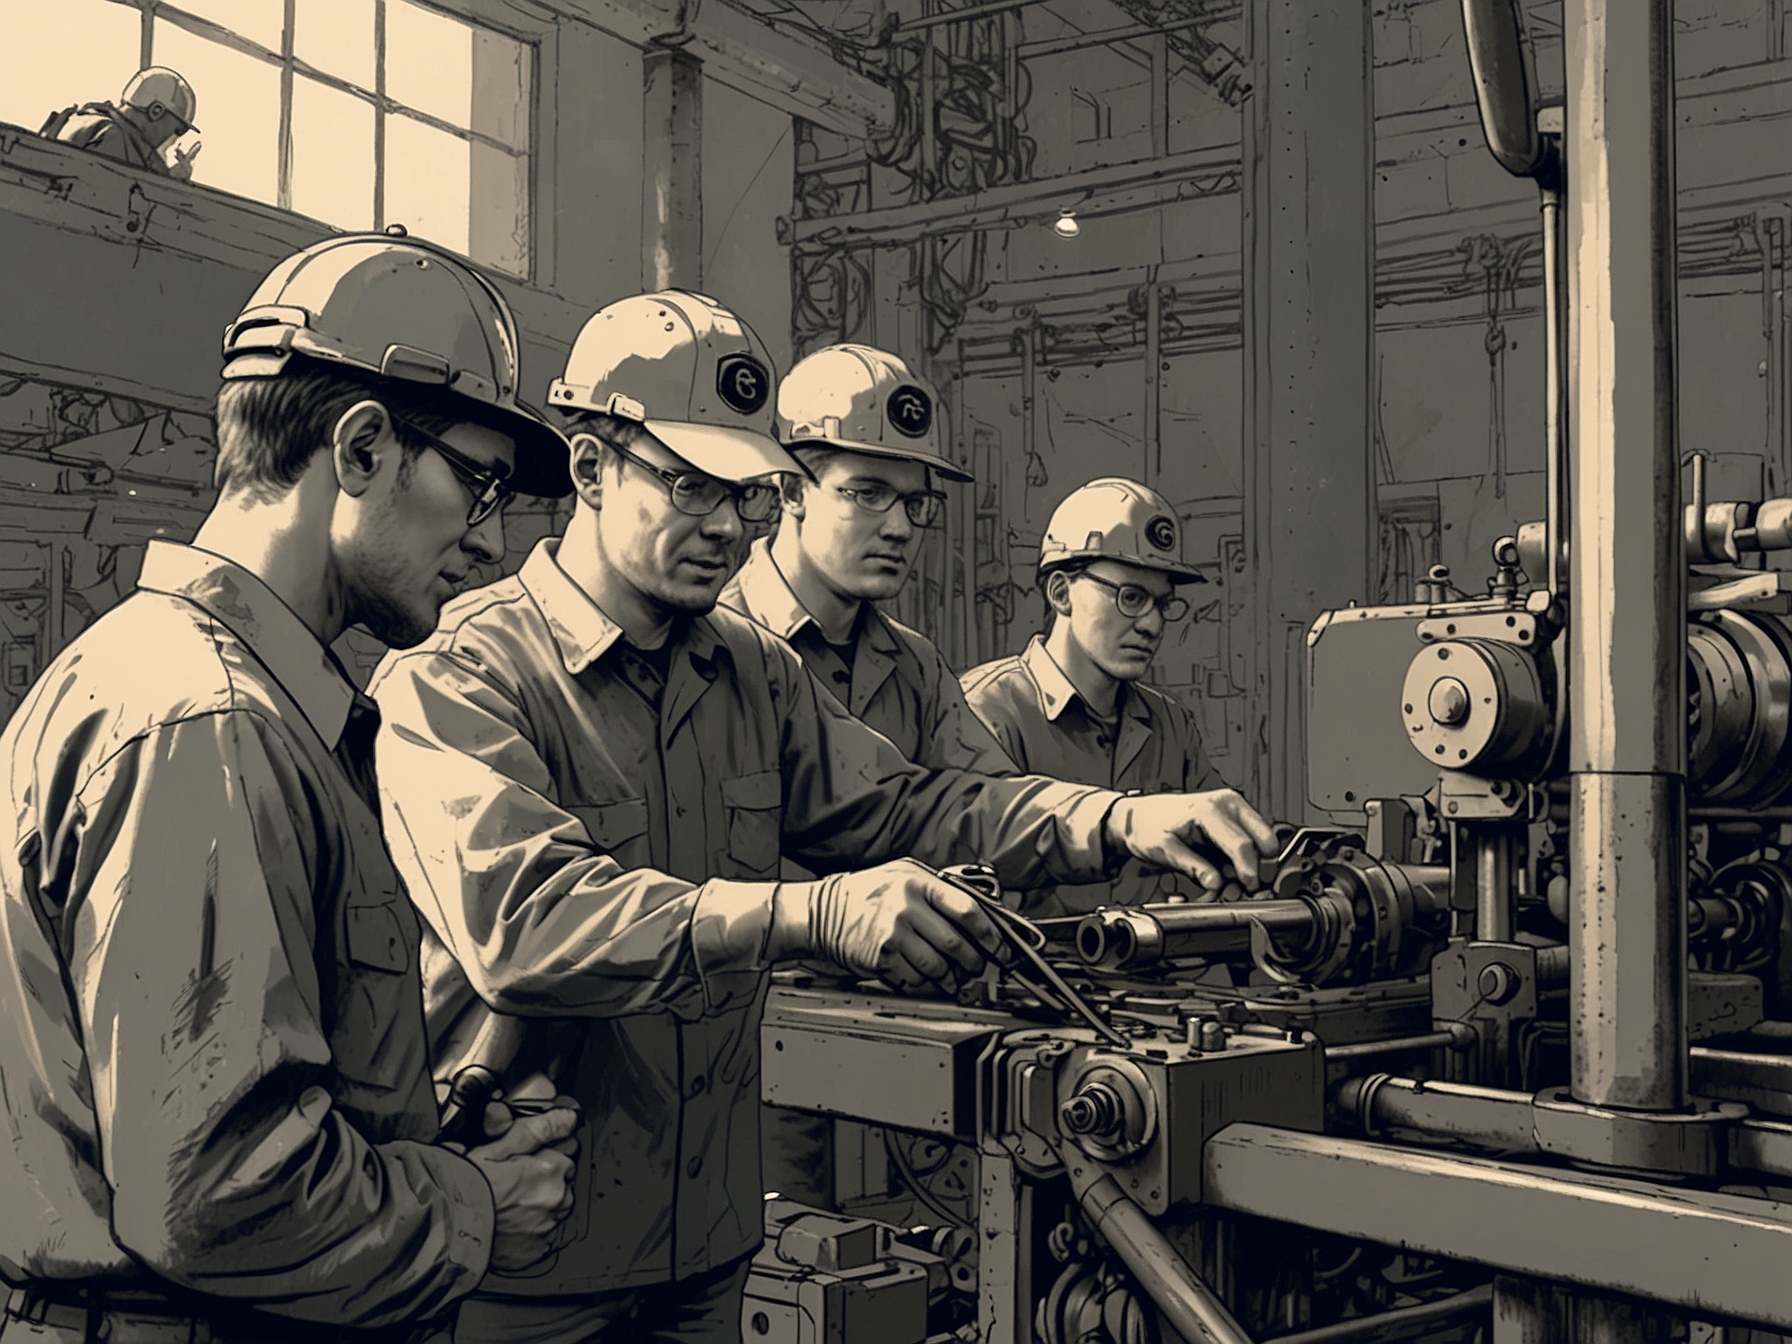 A group of workers receiving training on new machinery, representing Roberts’ vision for upskilling the workforce to adapt to advanced manufacturing technologies and secure long-term employment.